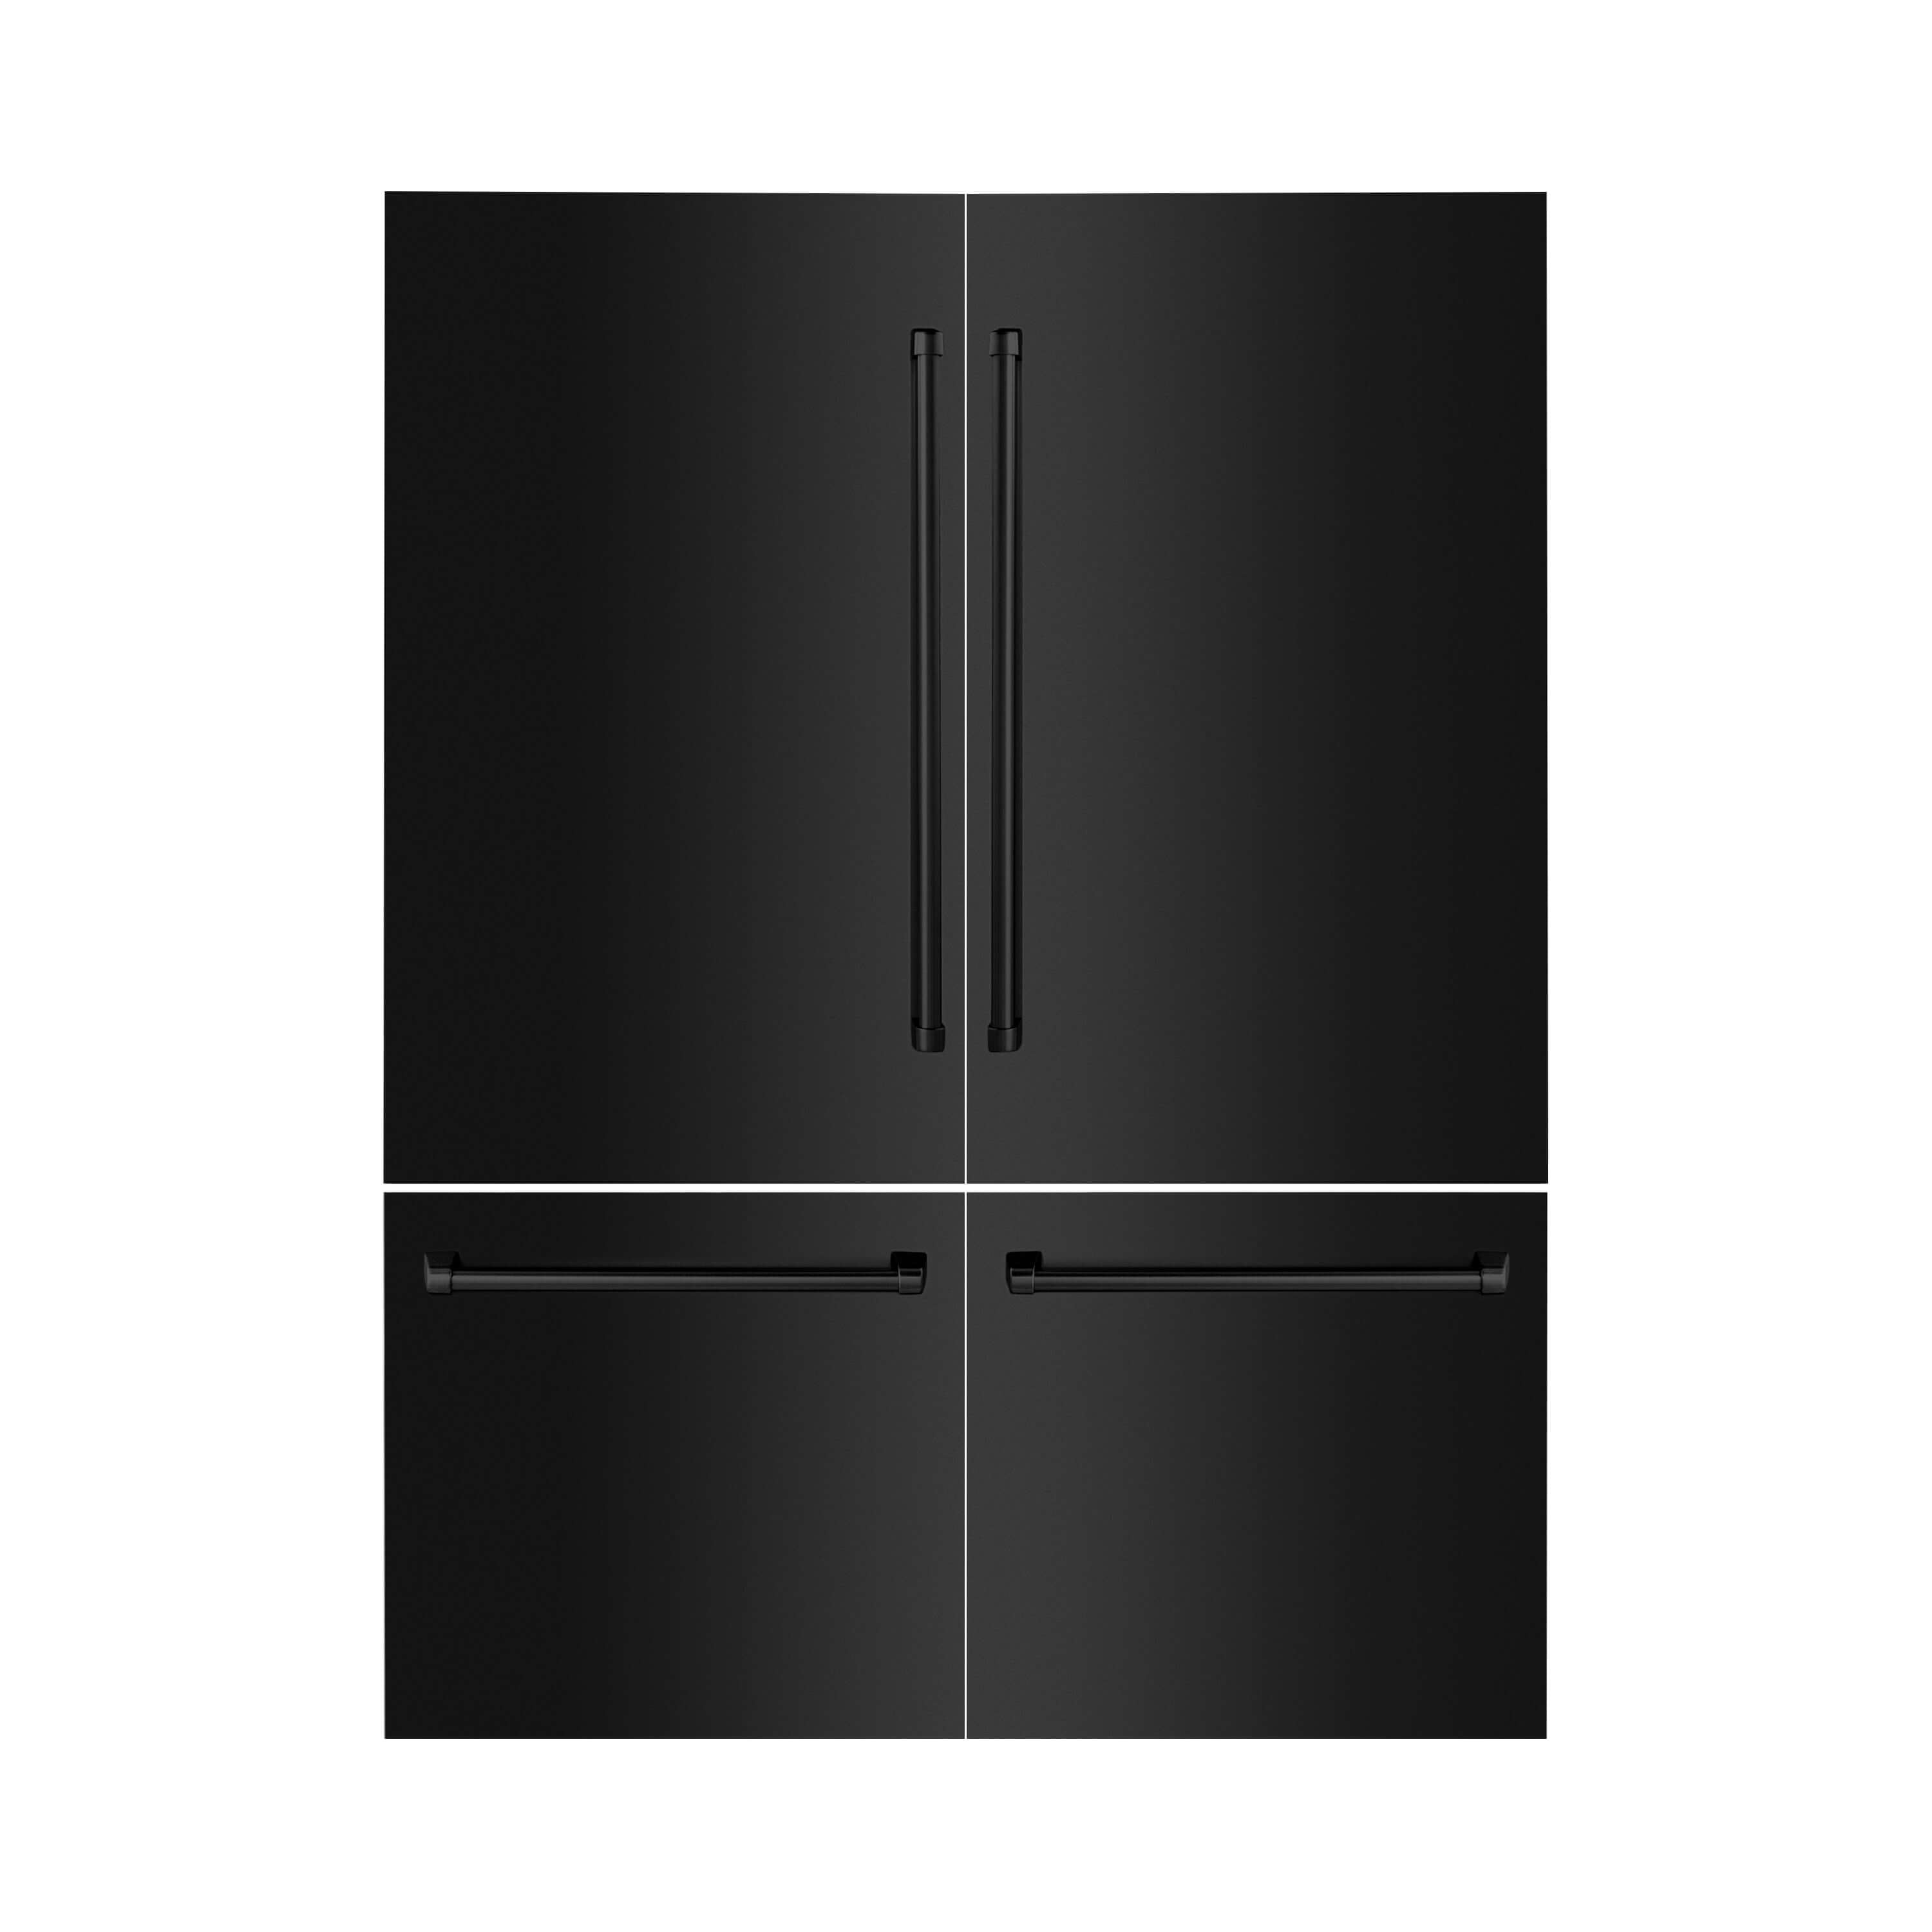 Panels & Handles Only- ZLINE 60 in. Refrigerator Panels in Black Stainless Steel for a 60 in. Built-in Refrigerator (RPBIV-BS-60)